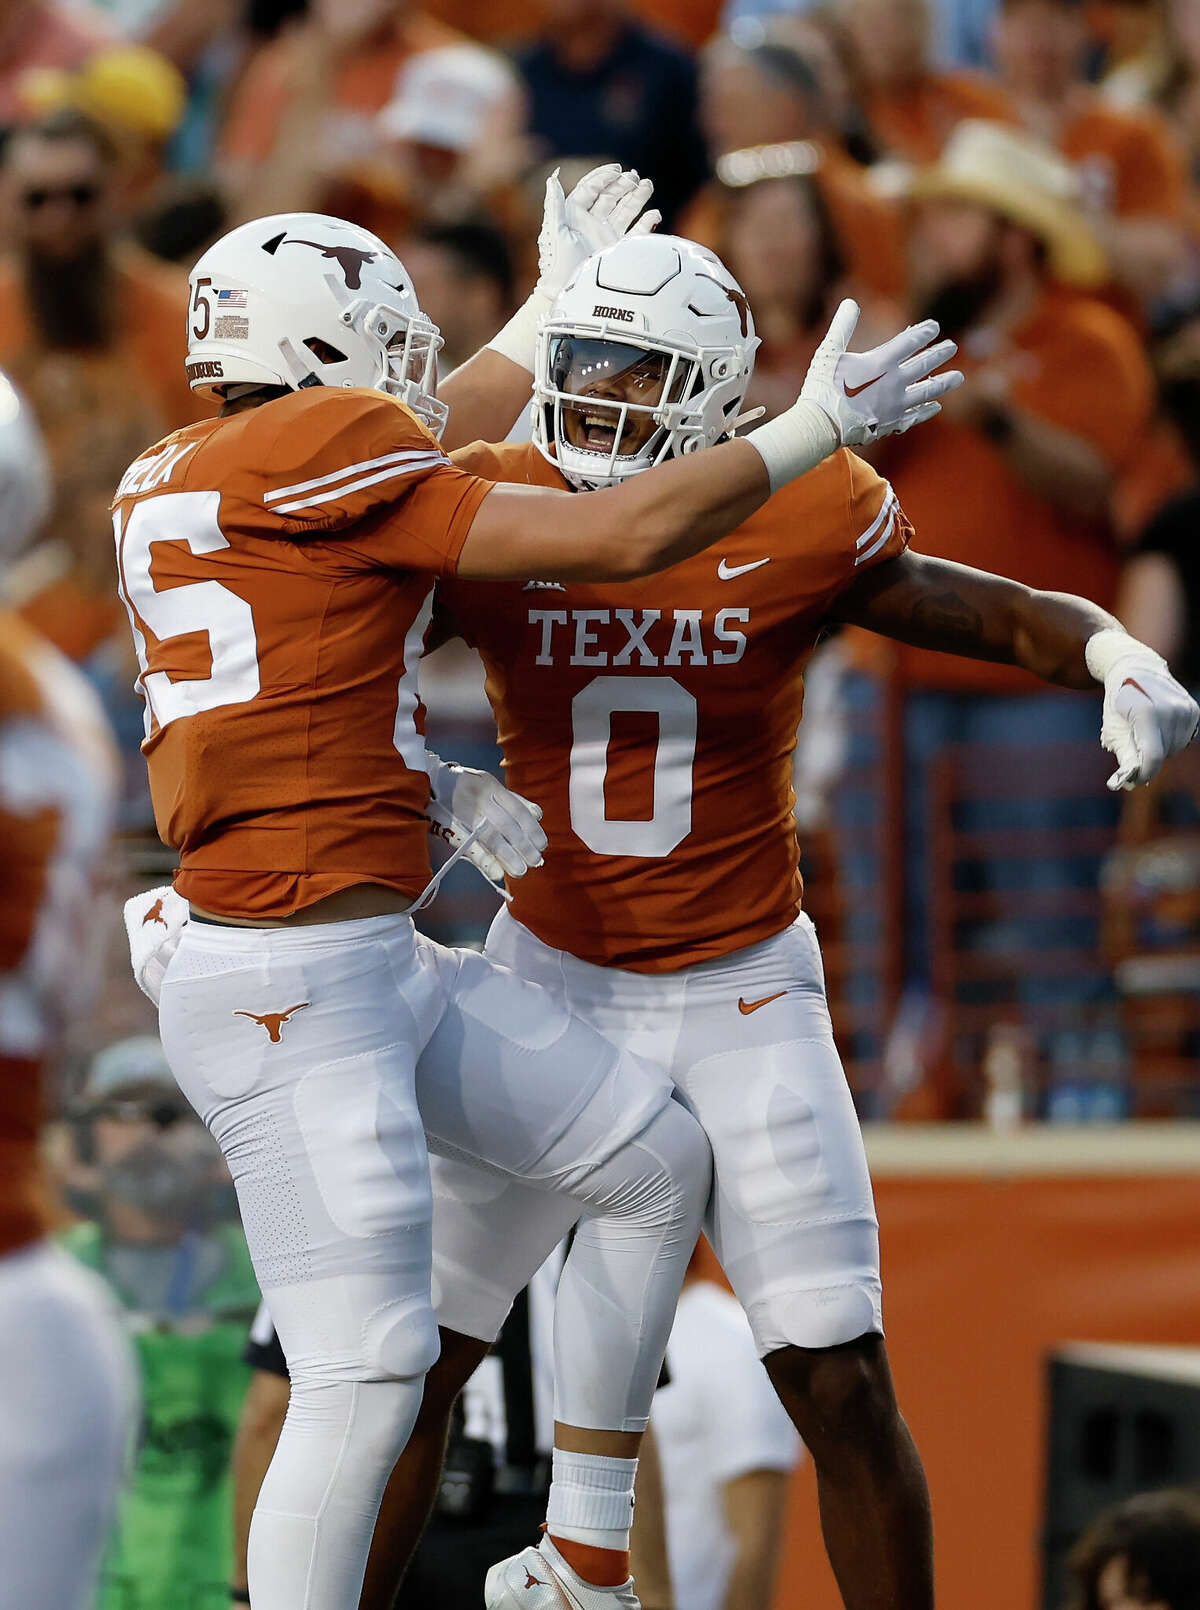 AUSTIN, TEXAS - OCTOBER 01: Gunnar Helm #85 of the Texas Longhorns celebrates with Ja'Tavion Sanders #0 after a touchdown reception in the first half against the West Virginia Mountaineers at Darrell K Royal-Texas Memorial Stadium on October 01, 2022 in Austin, Texas. (Photo by Tim Warner/Getty Images)